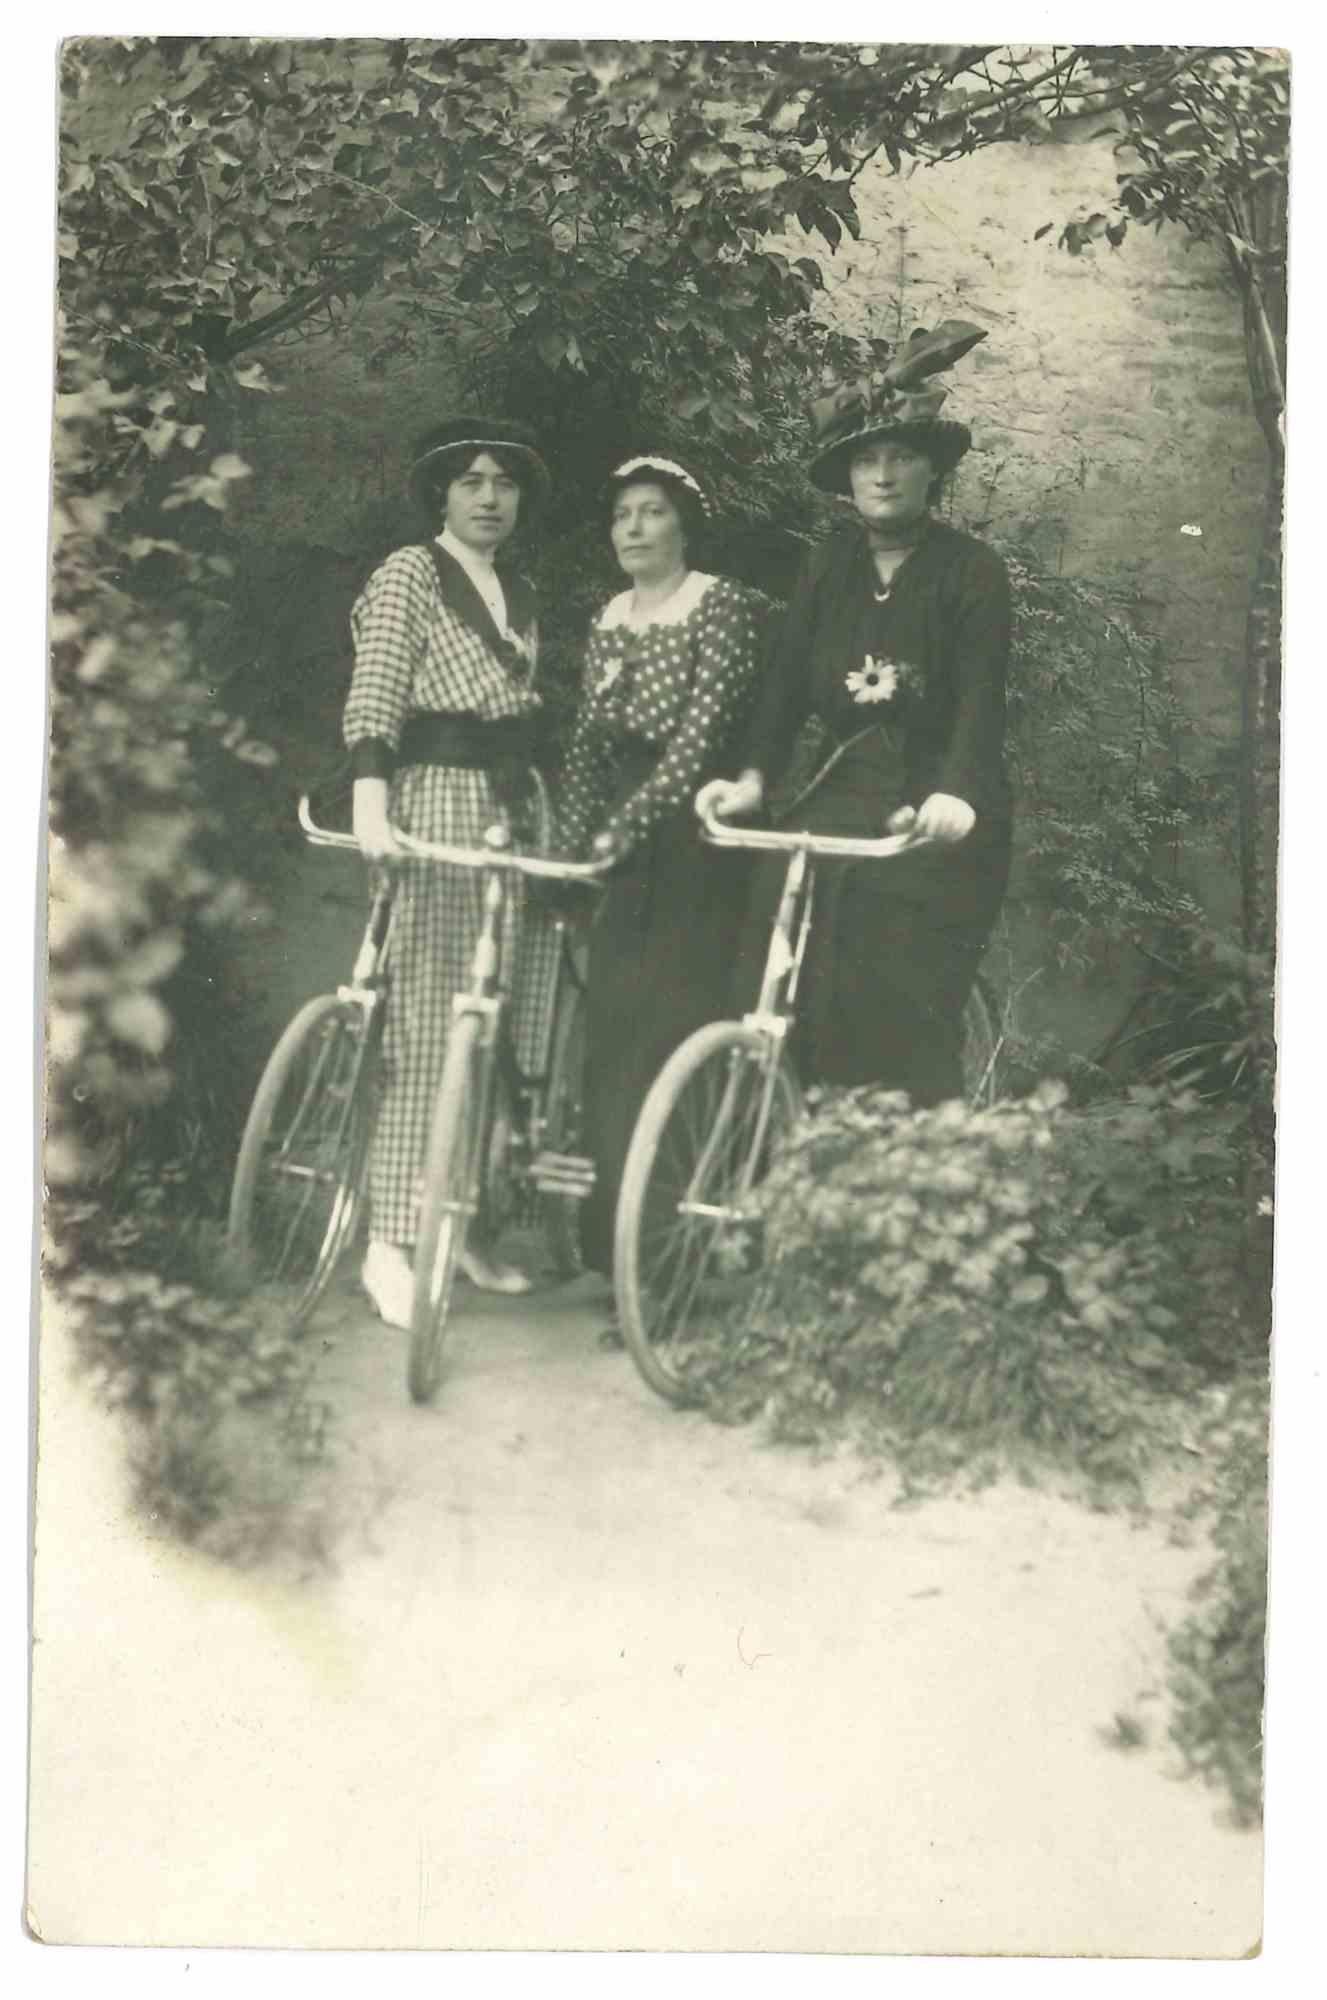 Unknown Figurative Photograph - Women with Bikes - The Old Days - Early 20th Century